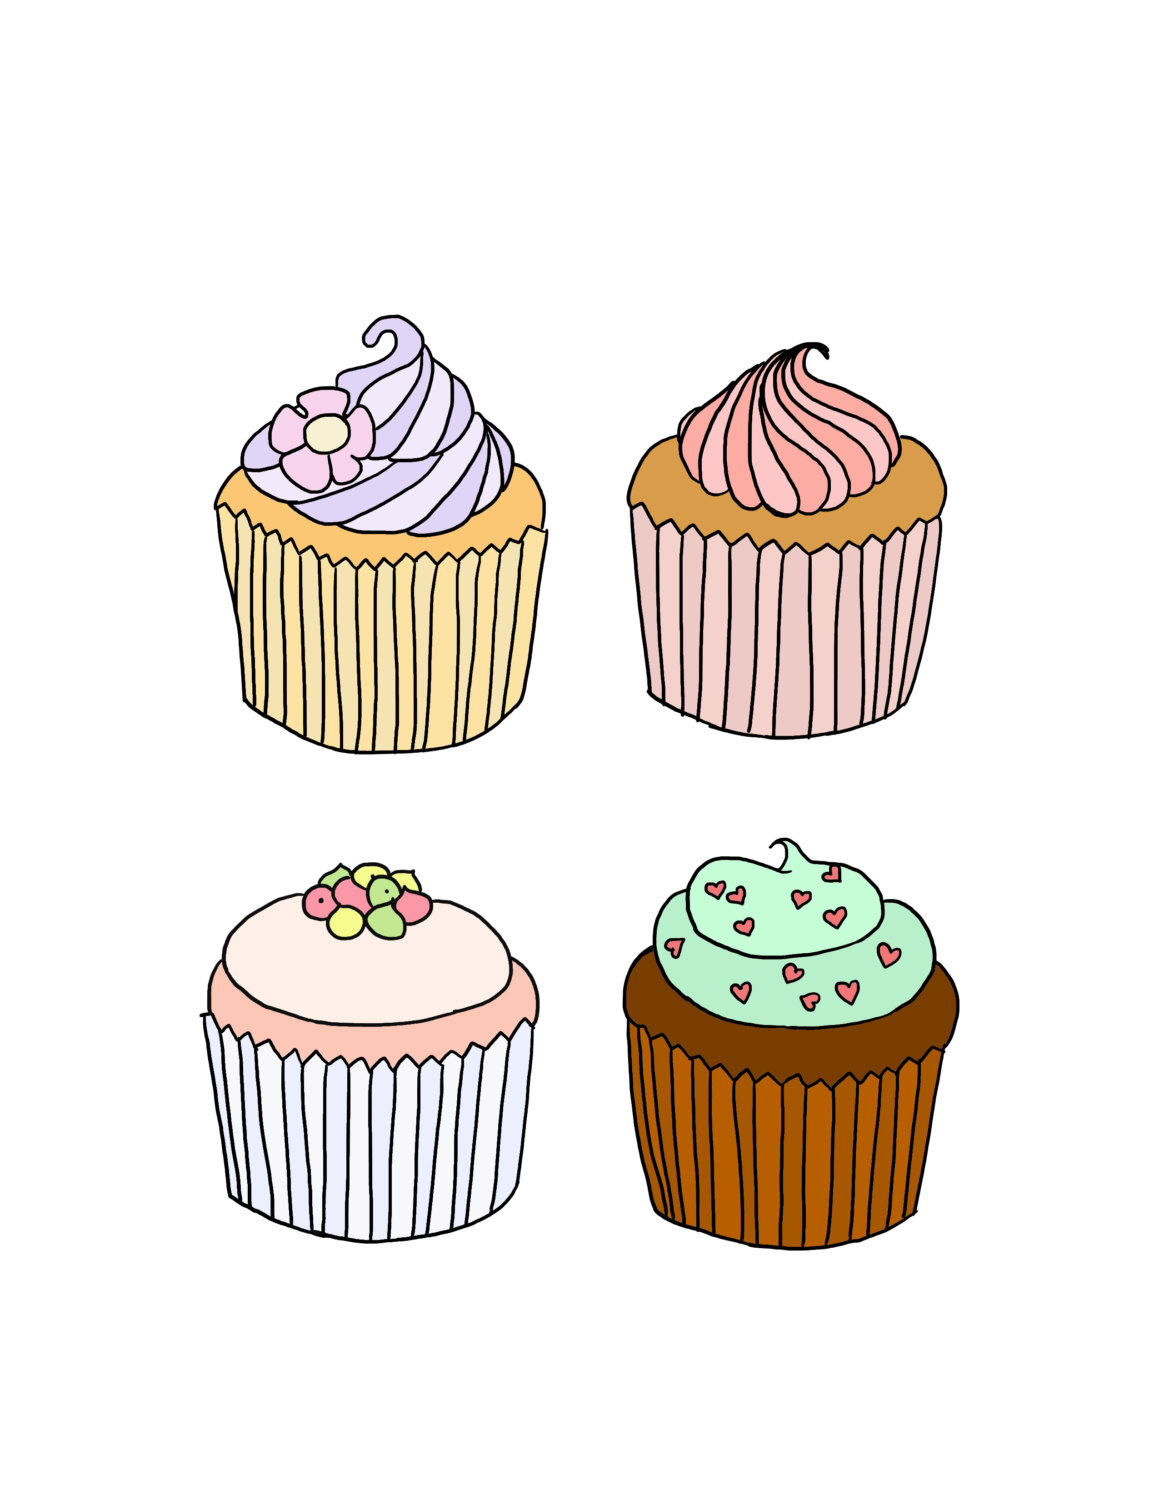 Popular items for cupcake illustration on Etsy